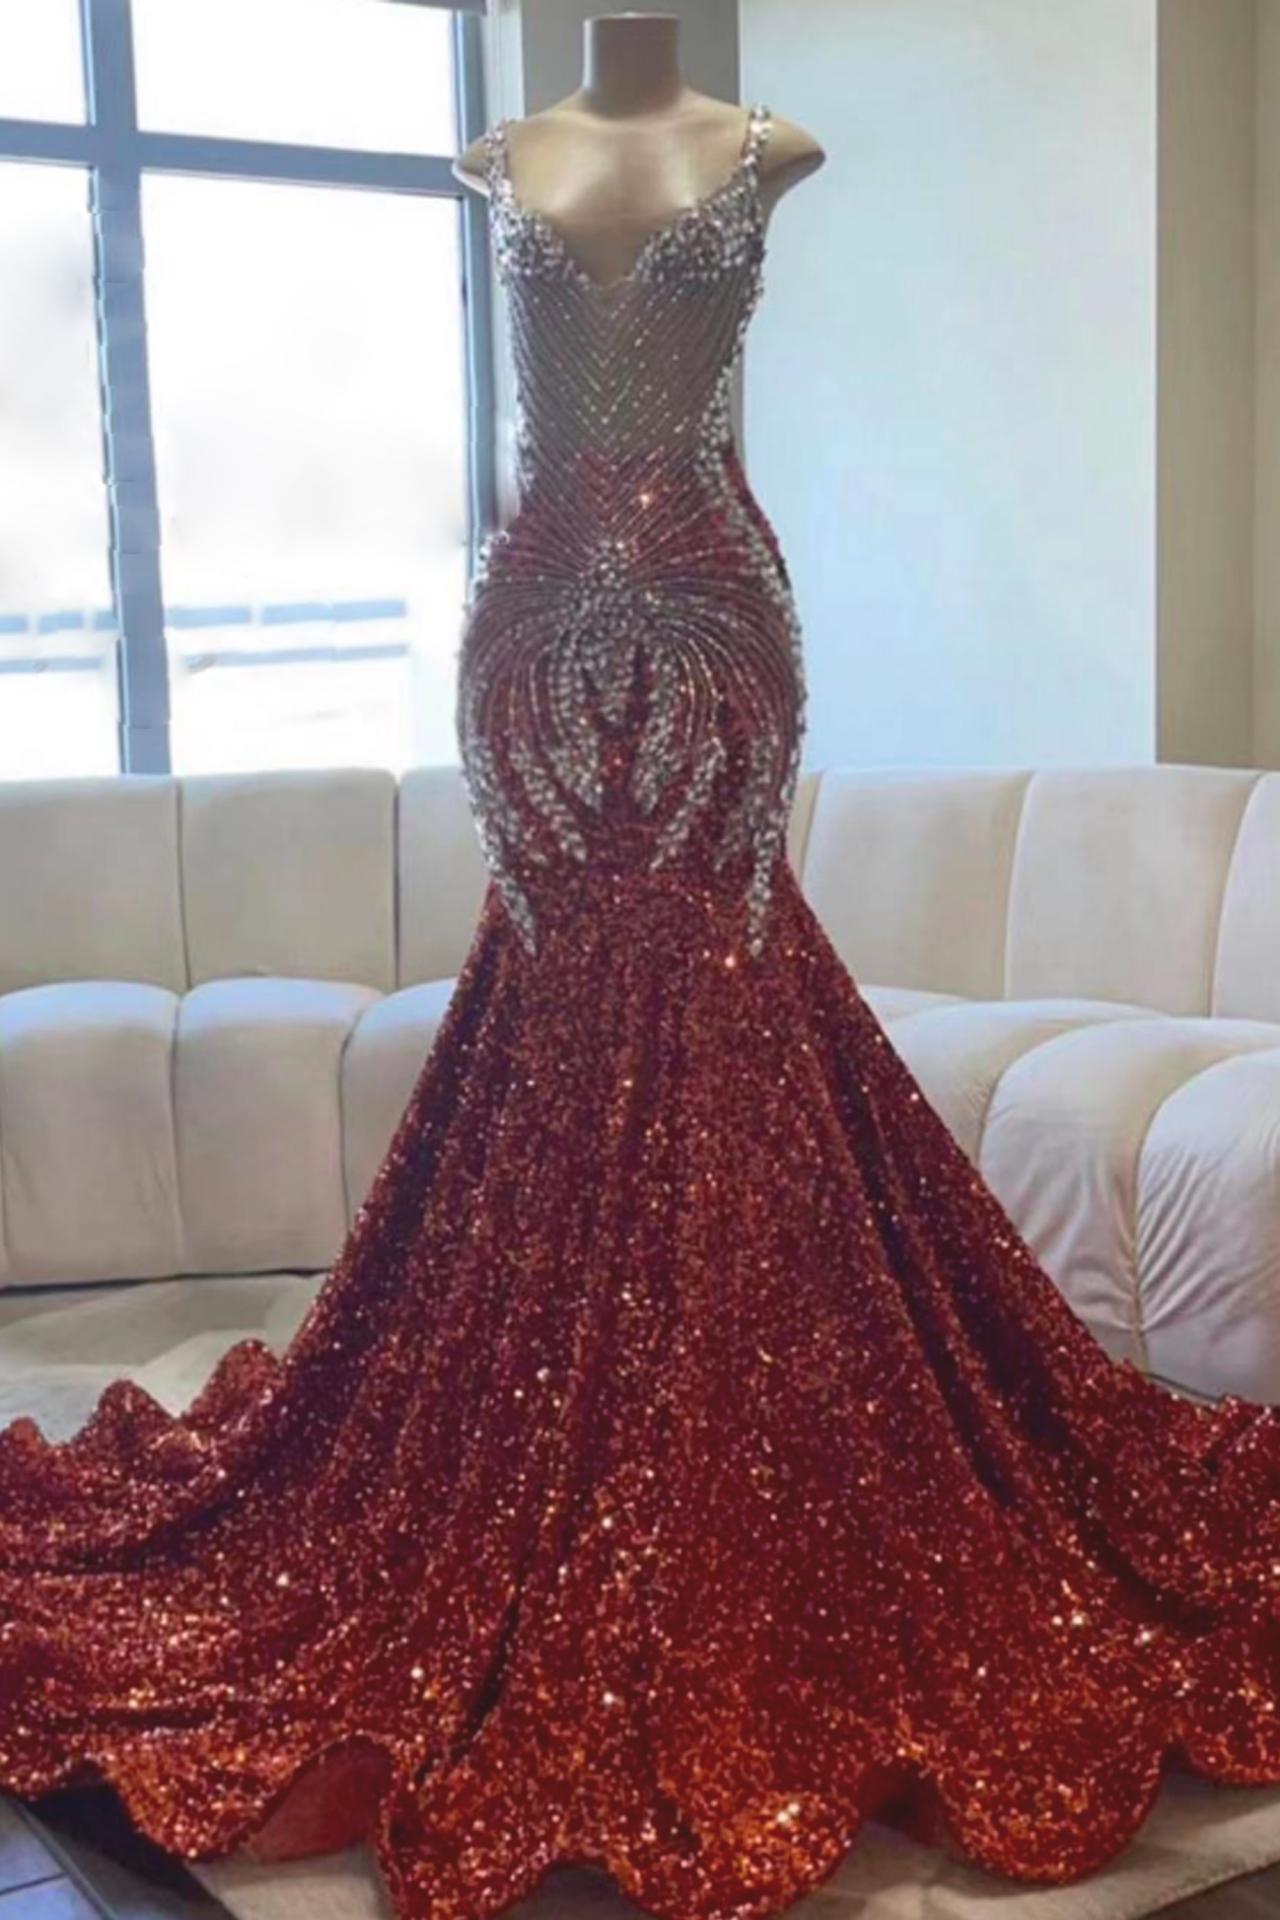 Modest Prom Dresses, Rhinestones Fashion Party Dresses, Custom Prom Dresses, Pretty Prom Dresses, Glitter Sequin Formal Gown, Beaded Evening